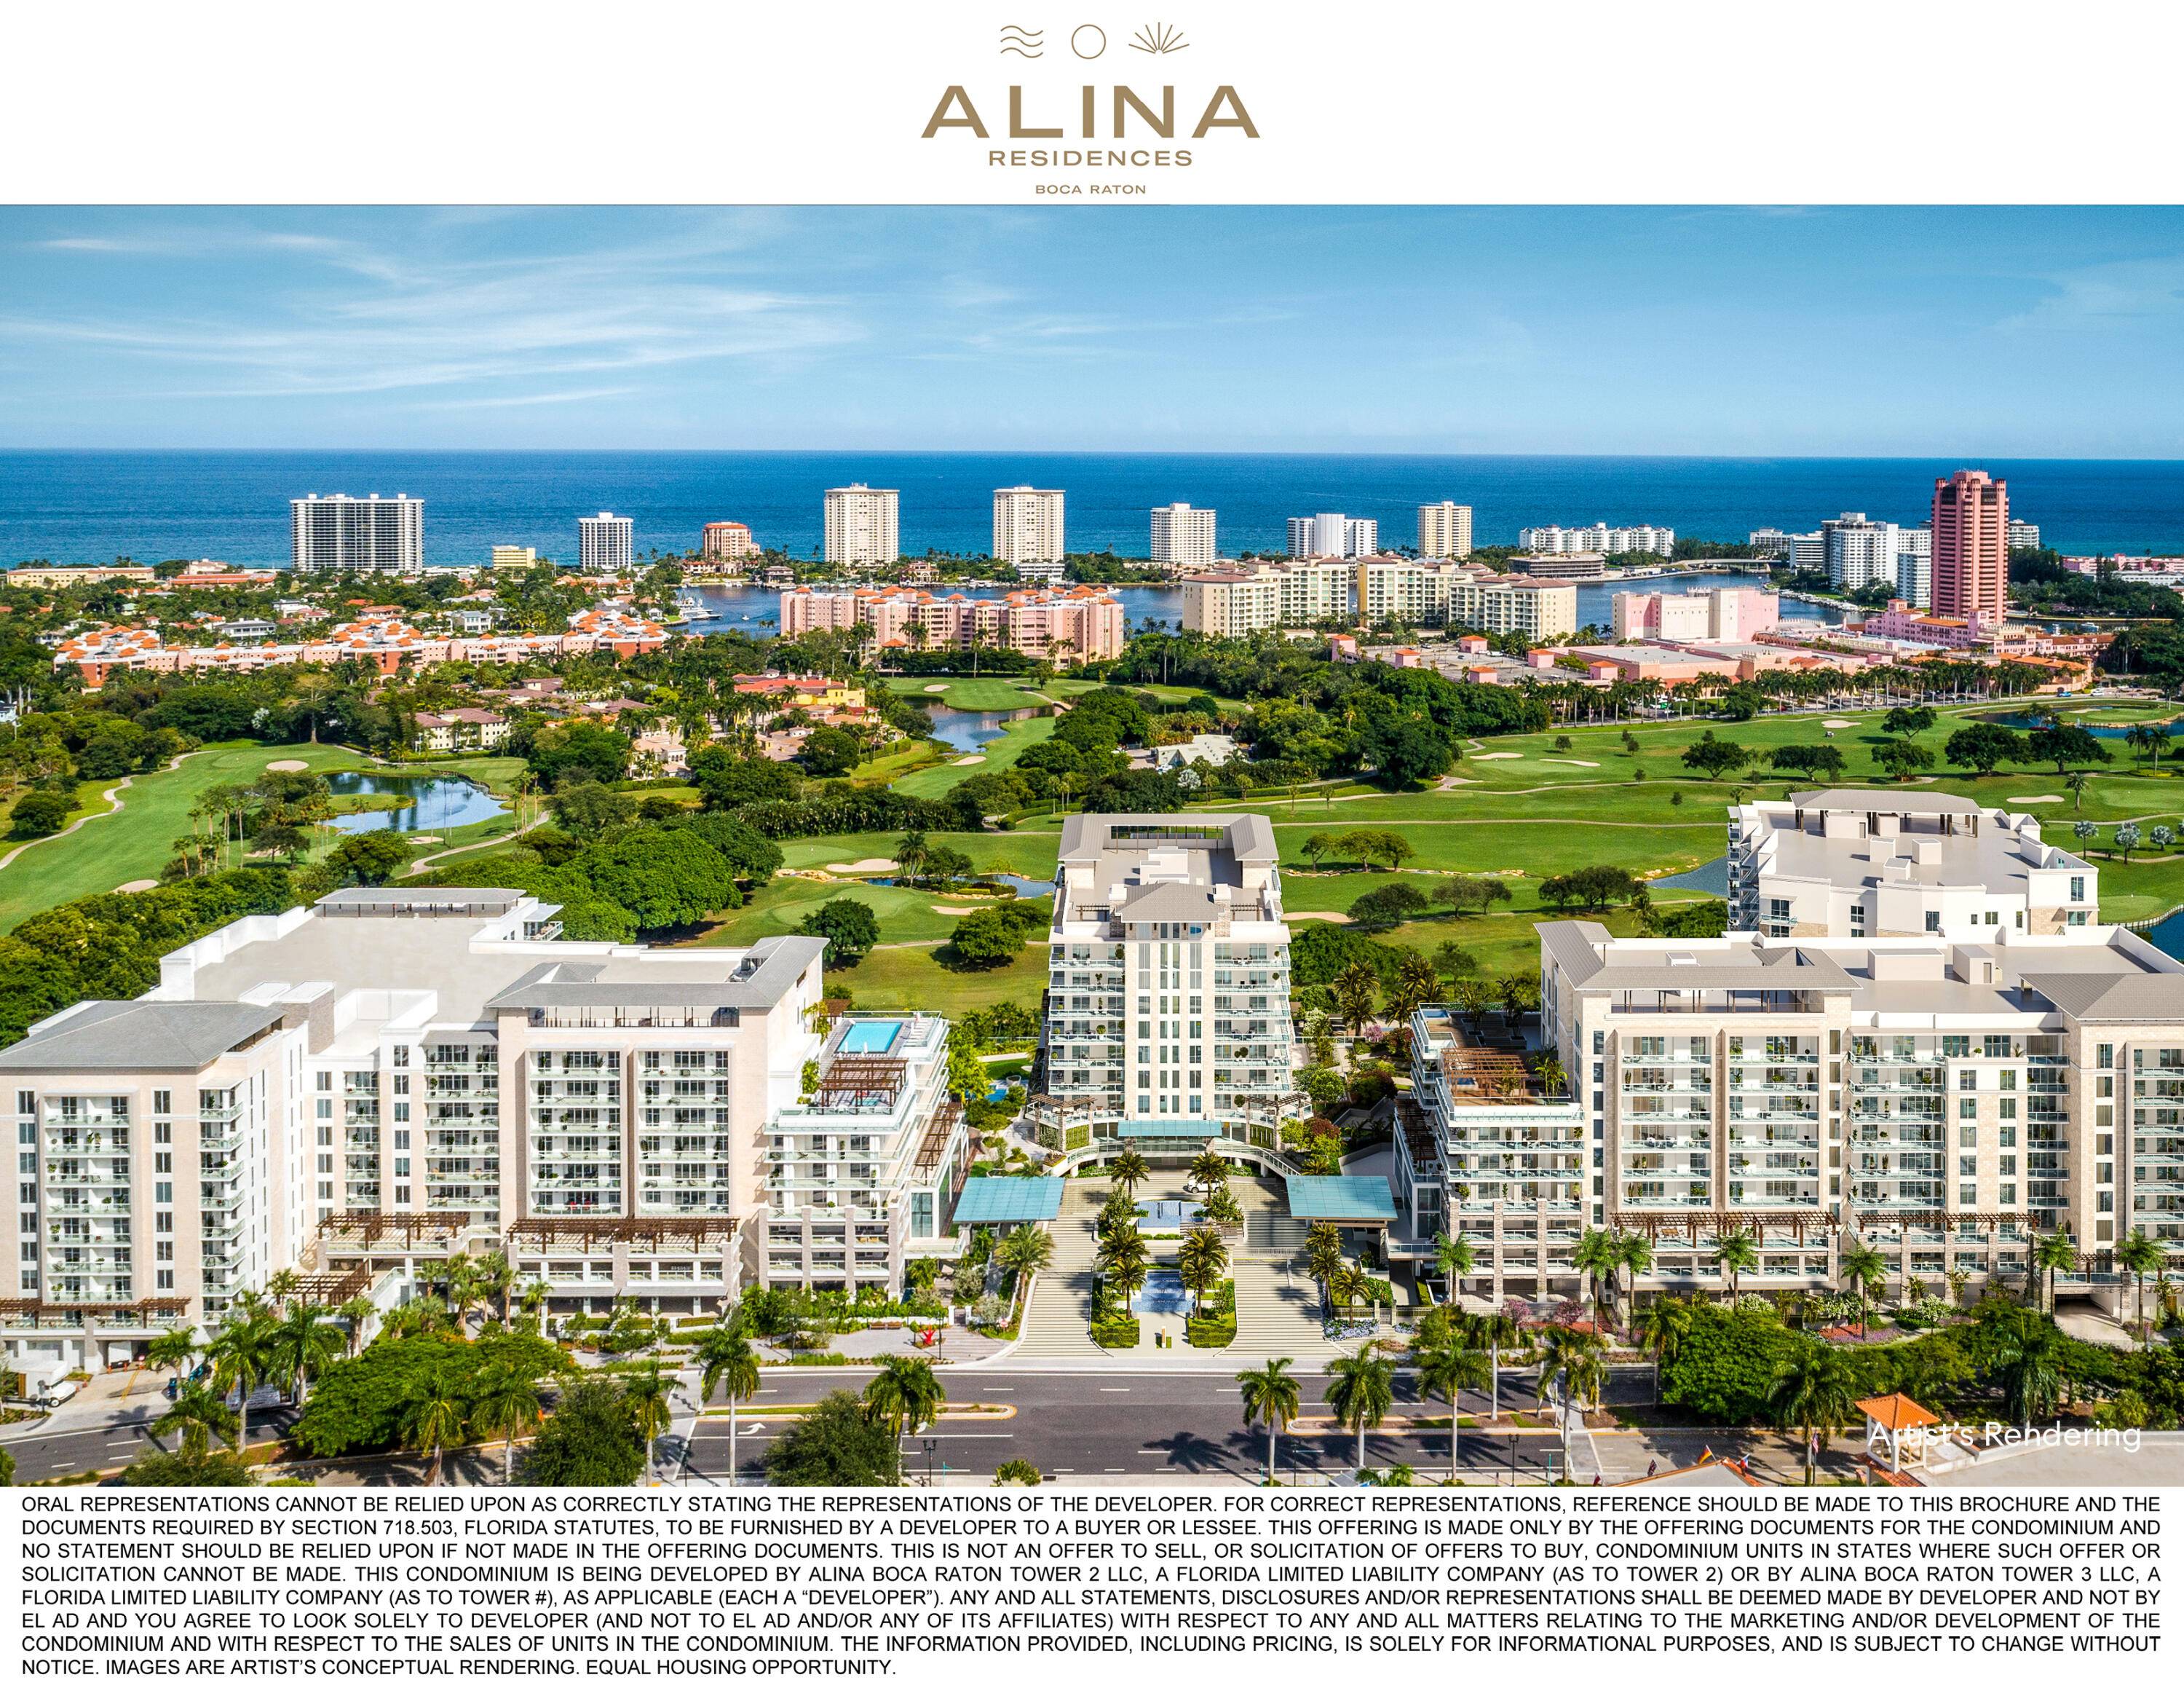 The hottest downtown Boca Raton luxury pre construction opportunity is ALINA.